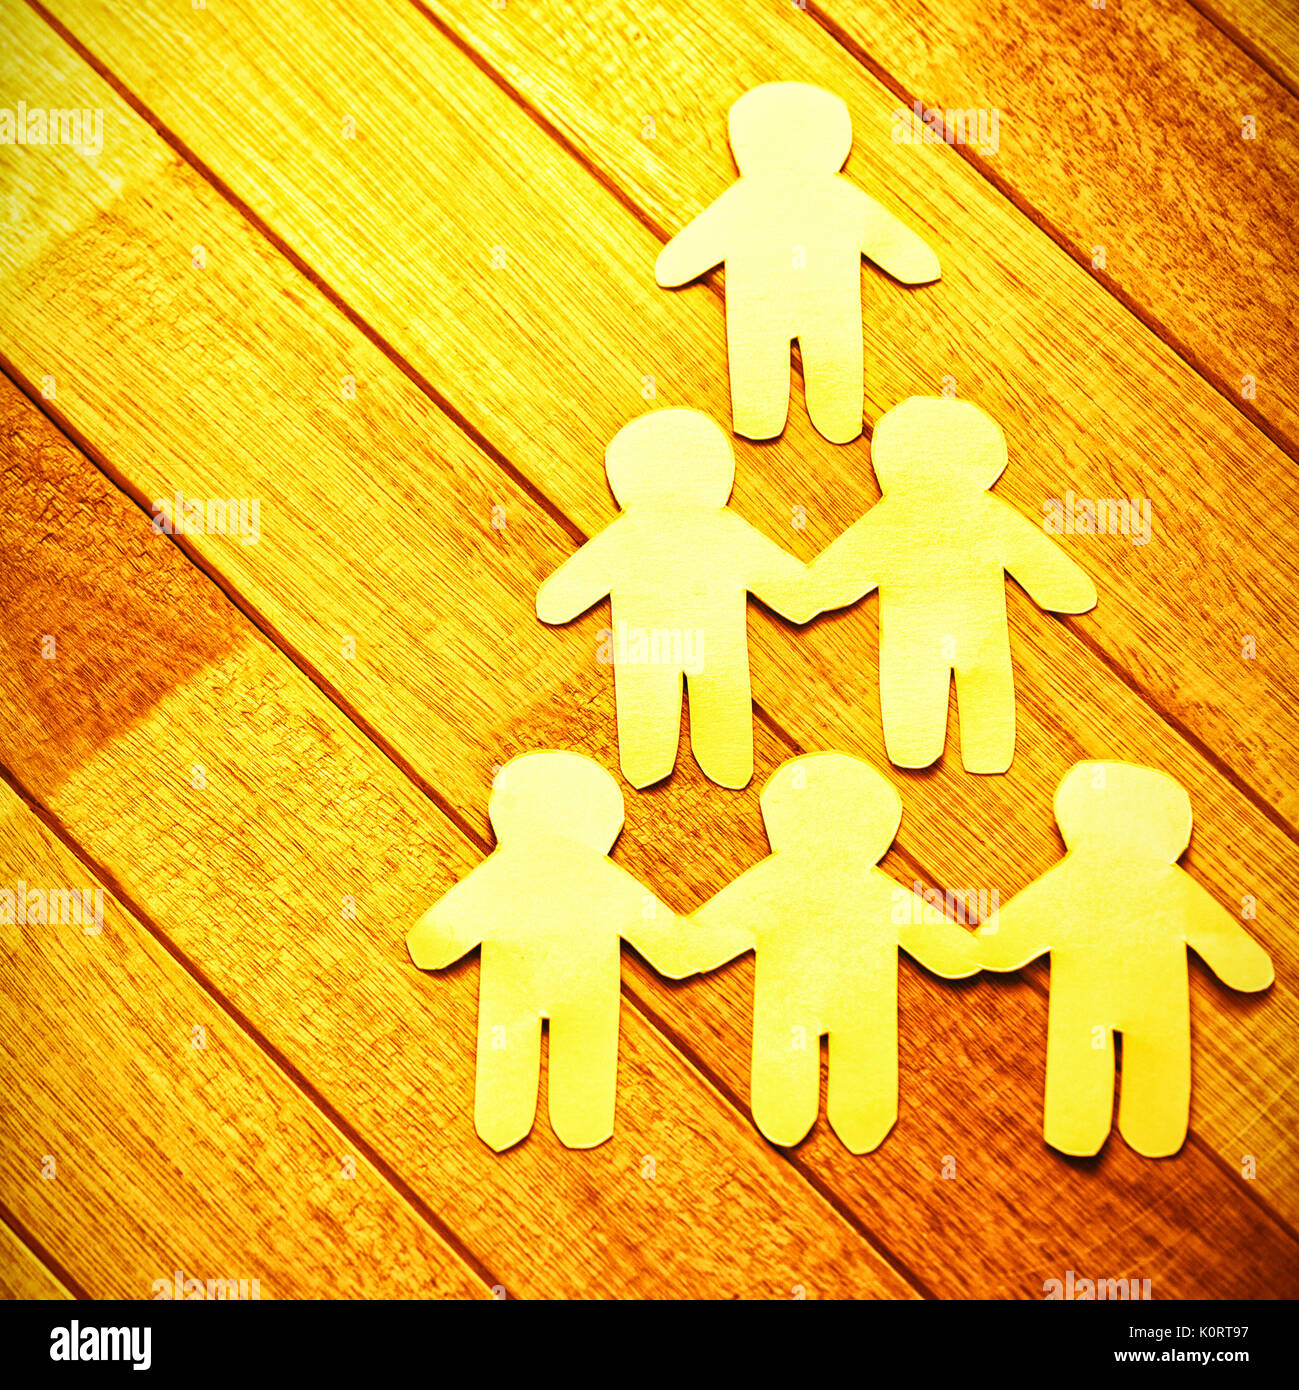 High angle view of paper cut out figures forming human pyramid on wooden table Stock Photo